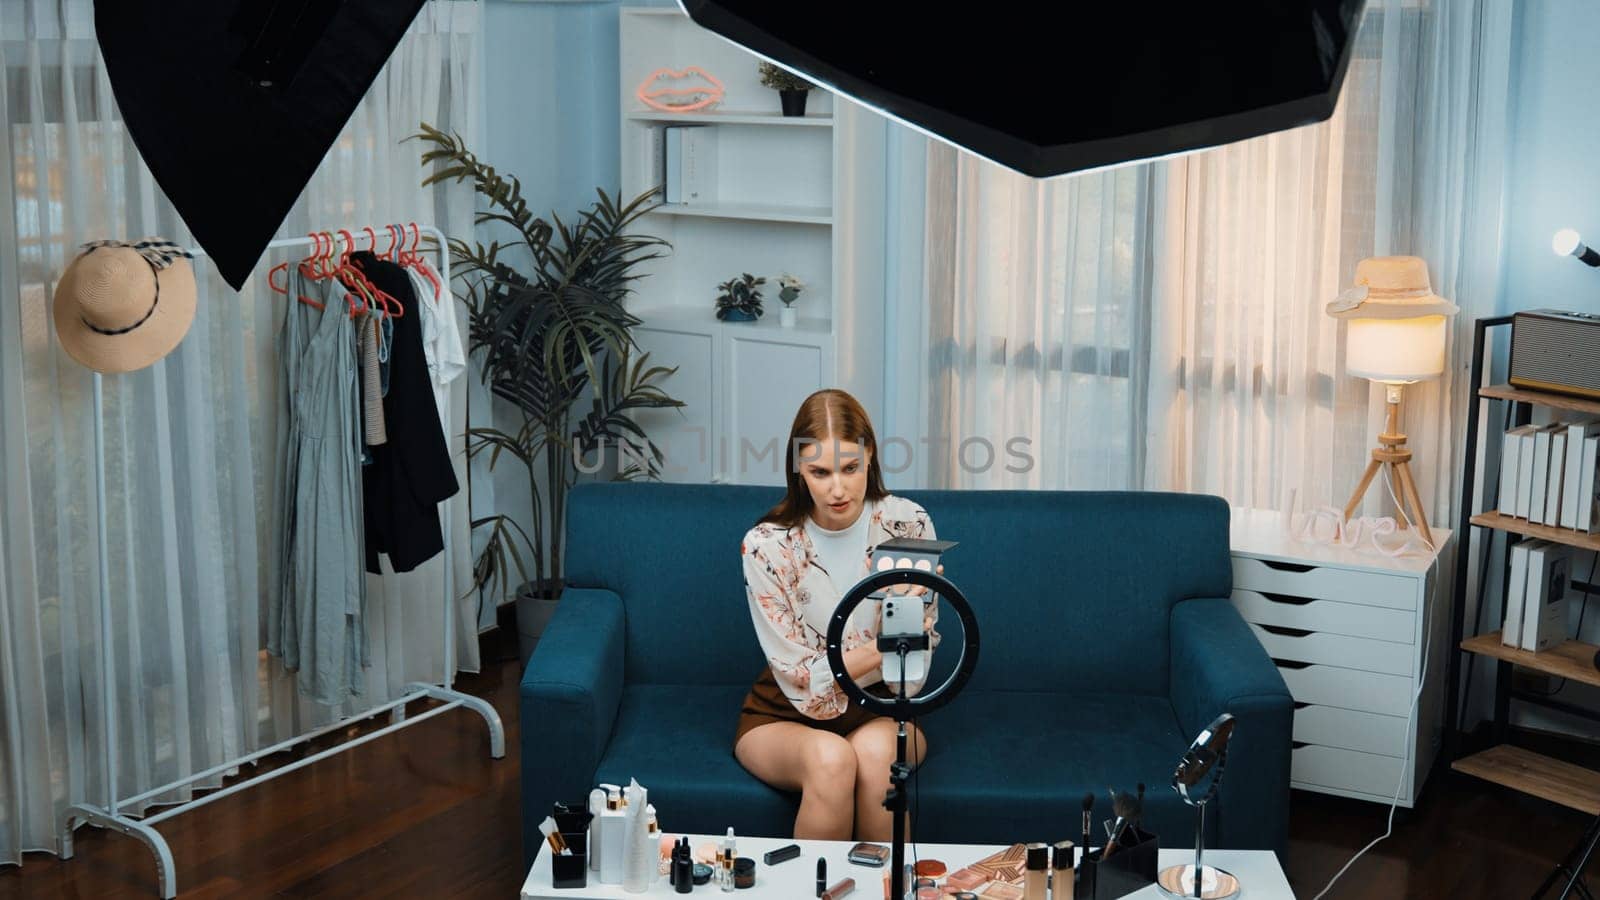 Woman influencer shoot live streaming vlog video review makeup prim social media or blog. Happy young girl with cosmetics studio lighting for marketing recording session broadcasting online.